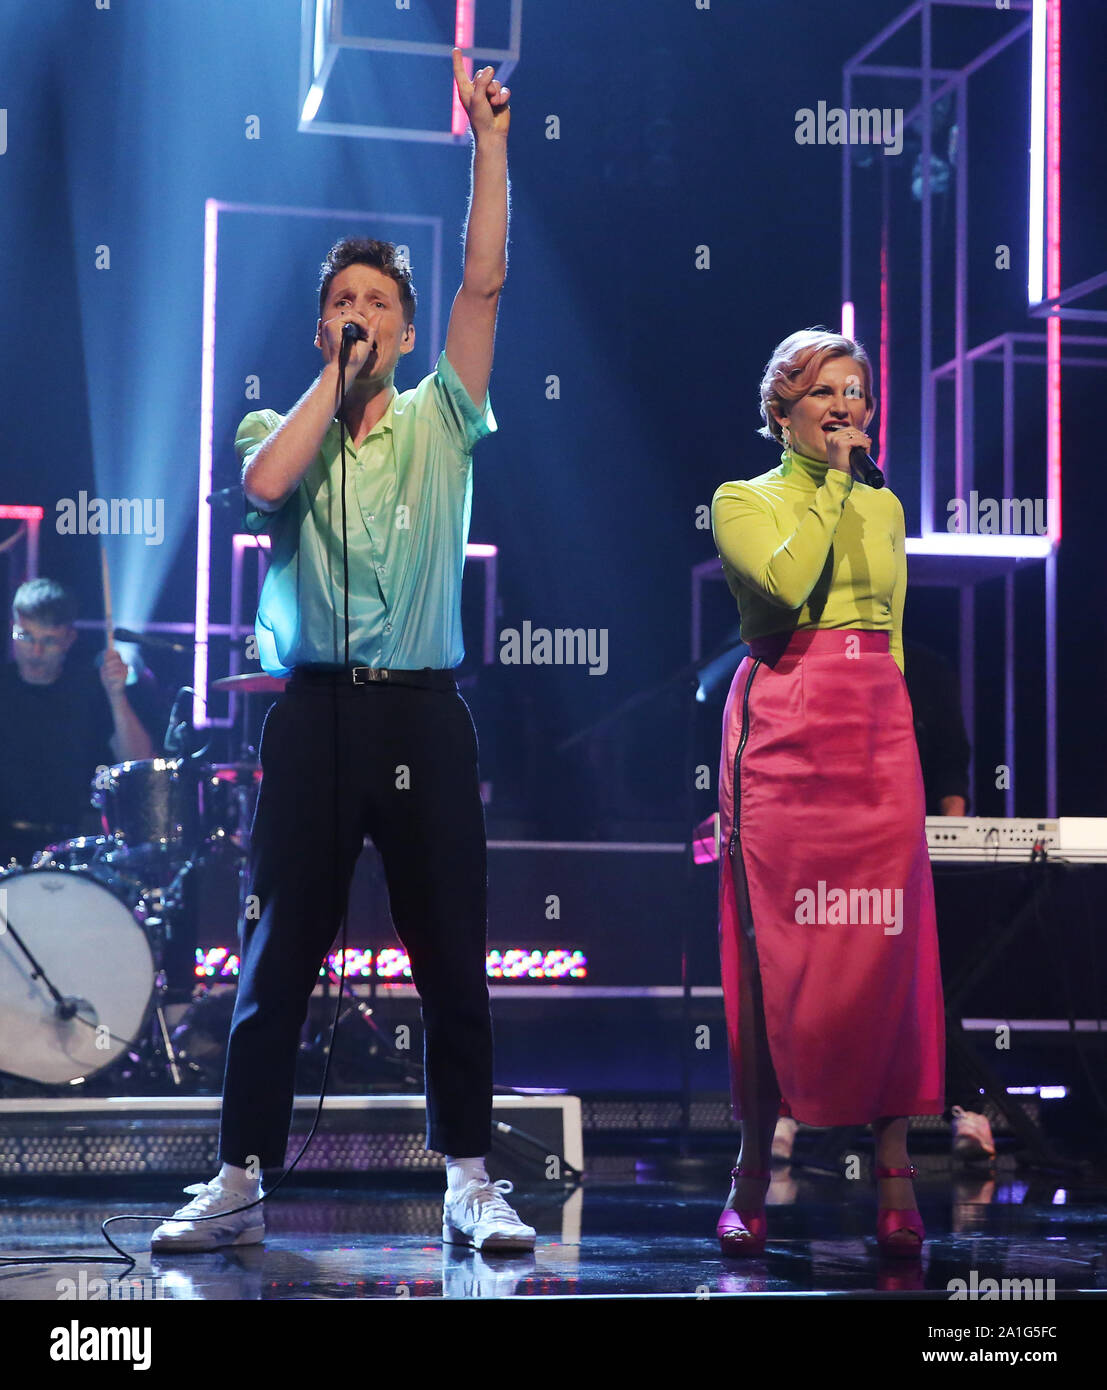 (left to right) Anders SG and Stine Bramsen from Alphabeat performing during the filming for the Graham Norton Show at BBC Studioworks 6 Television Centre, Wood Lane, London, to be aired on BBC One on Friday evening. Stock Photo